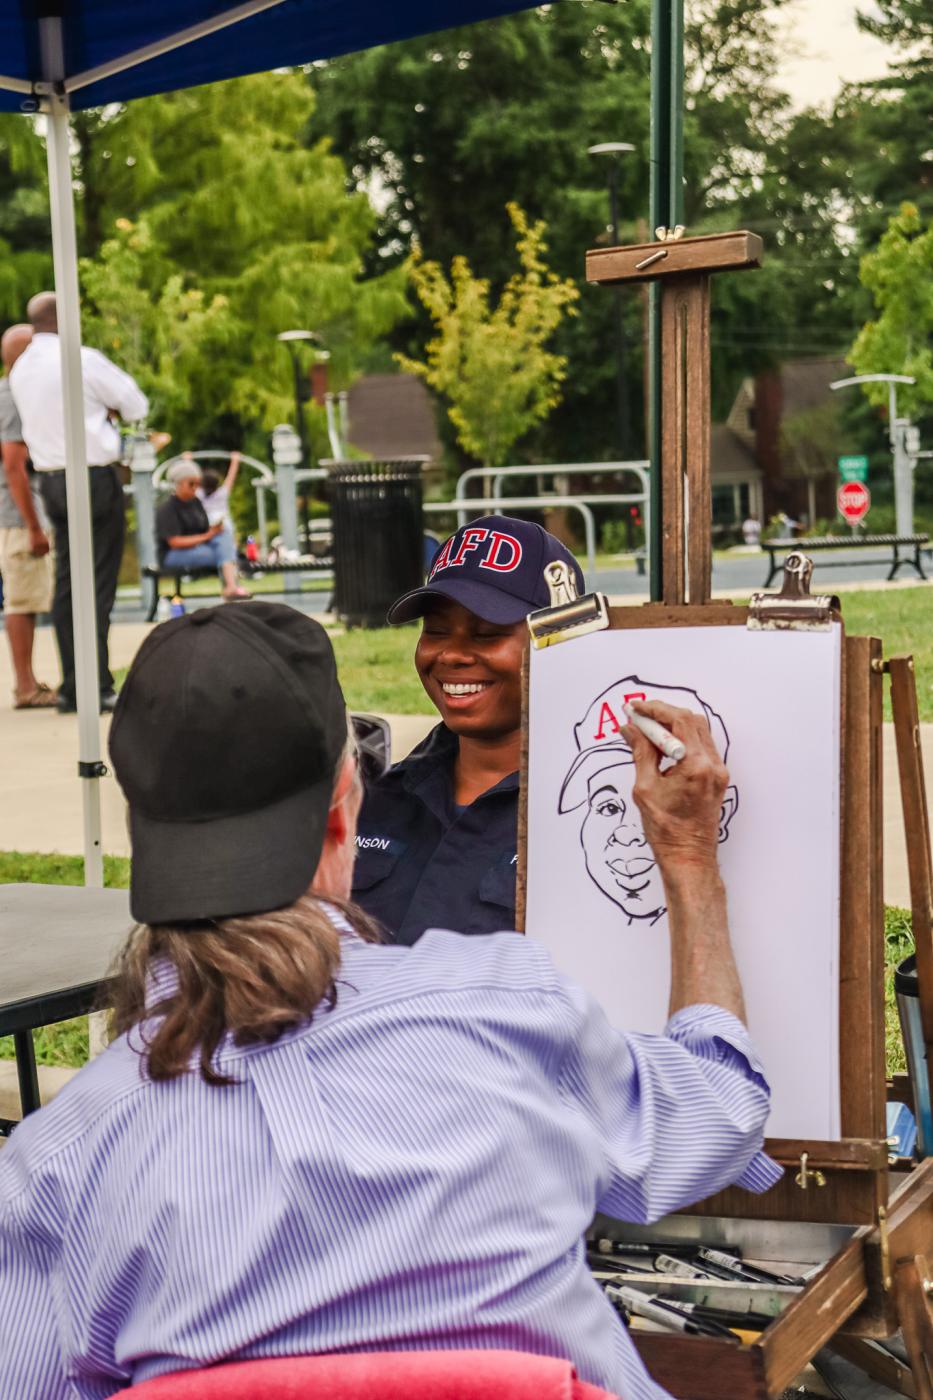 Alexandria police is posing for a caricature sketch